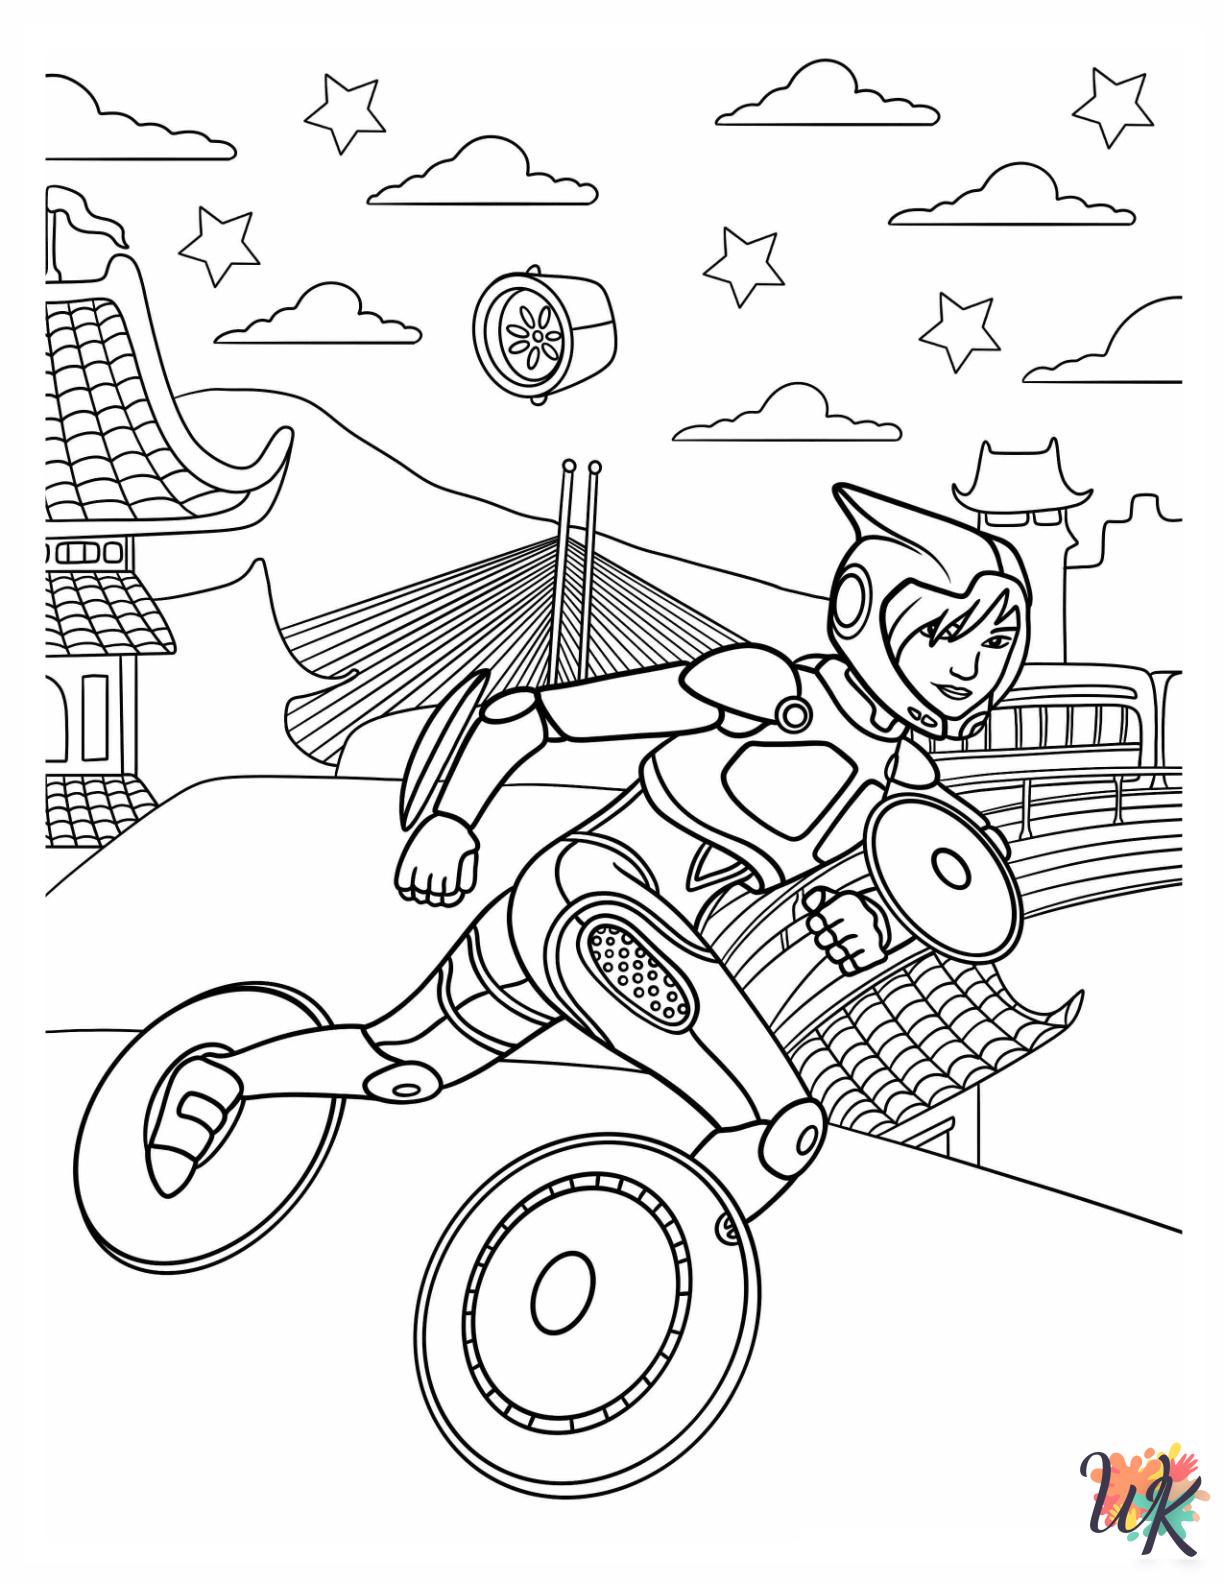 Big Hero 6 coloring pages easy